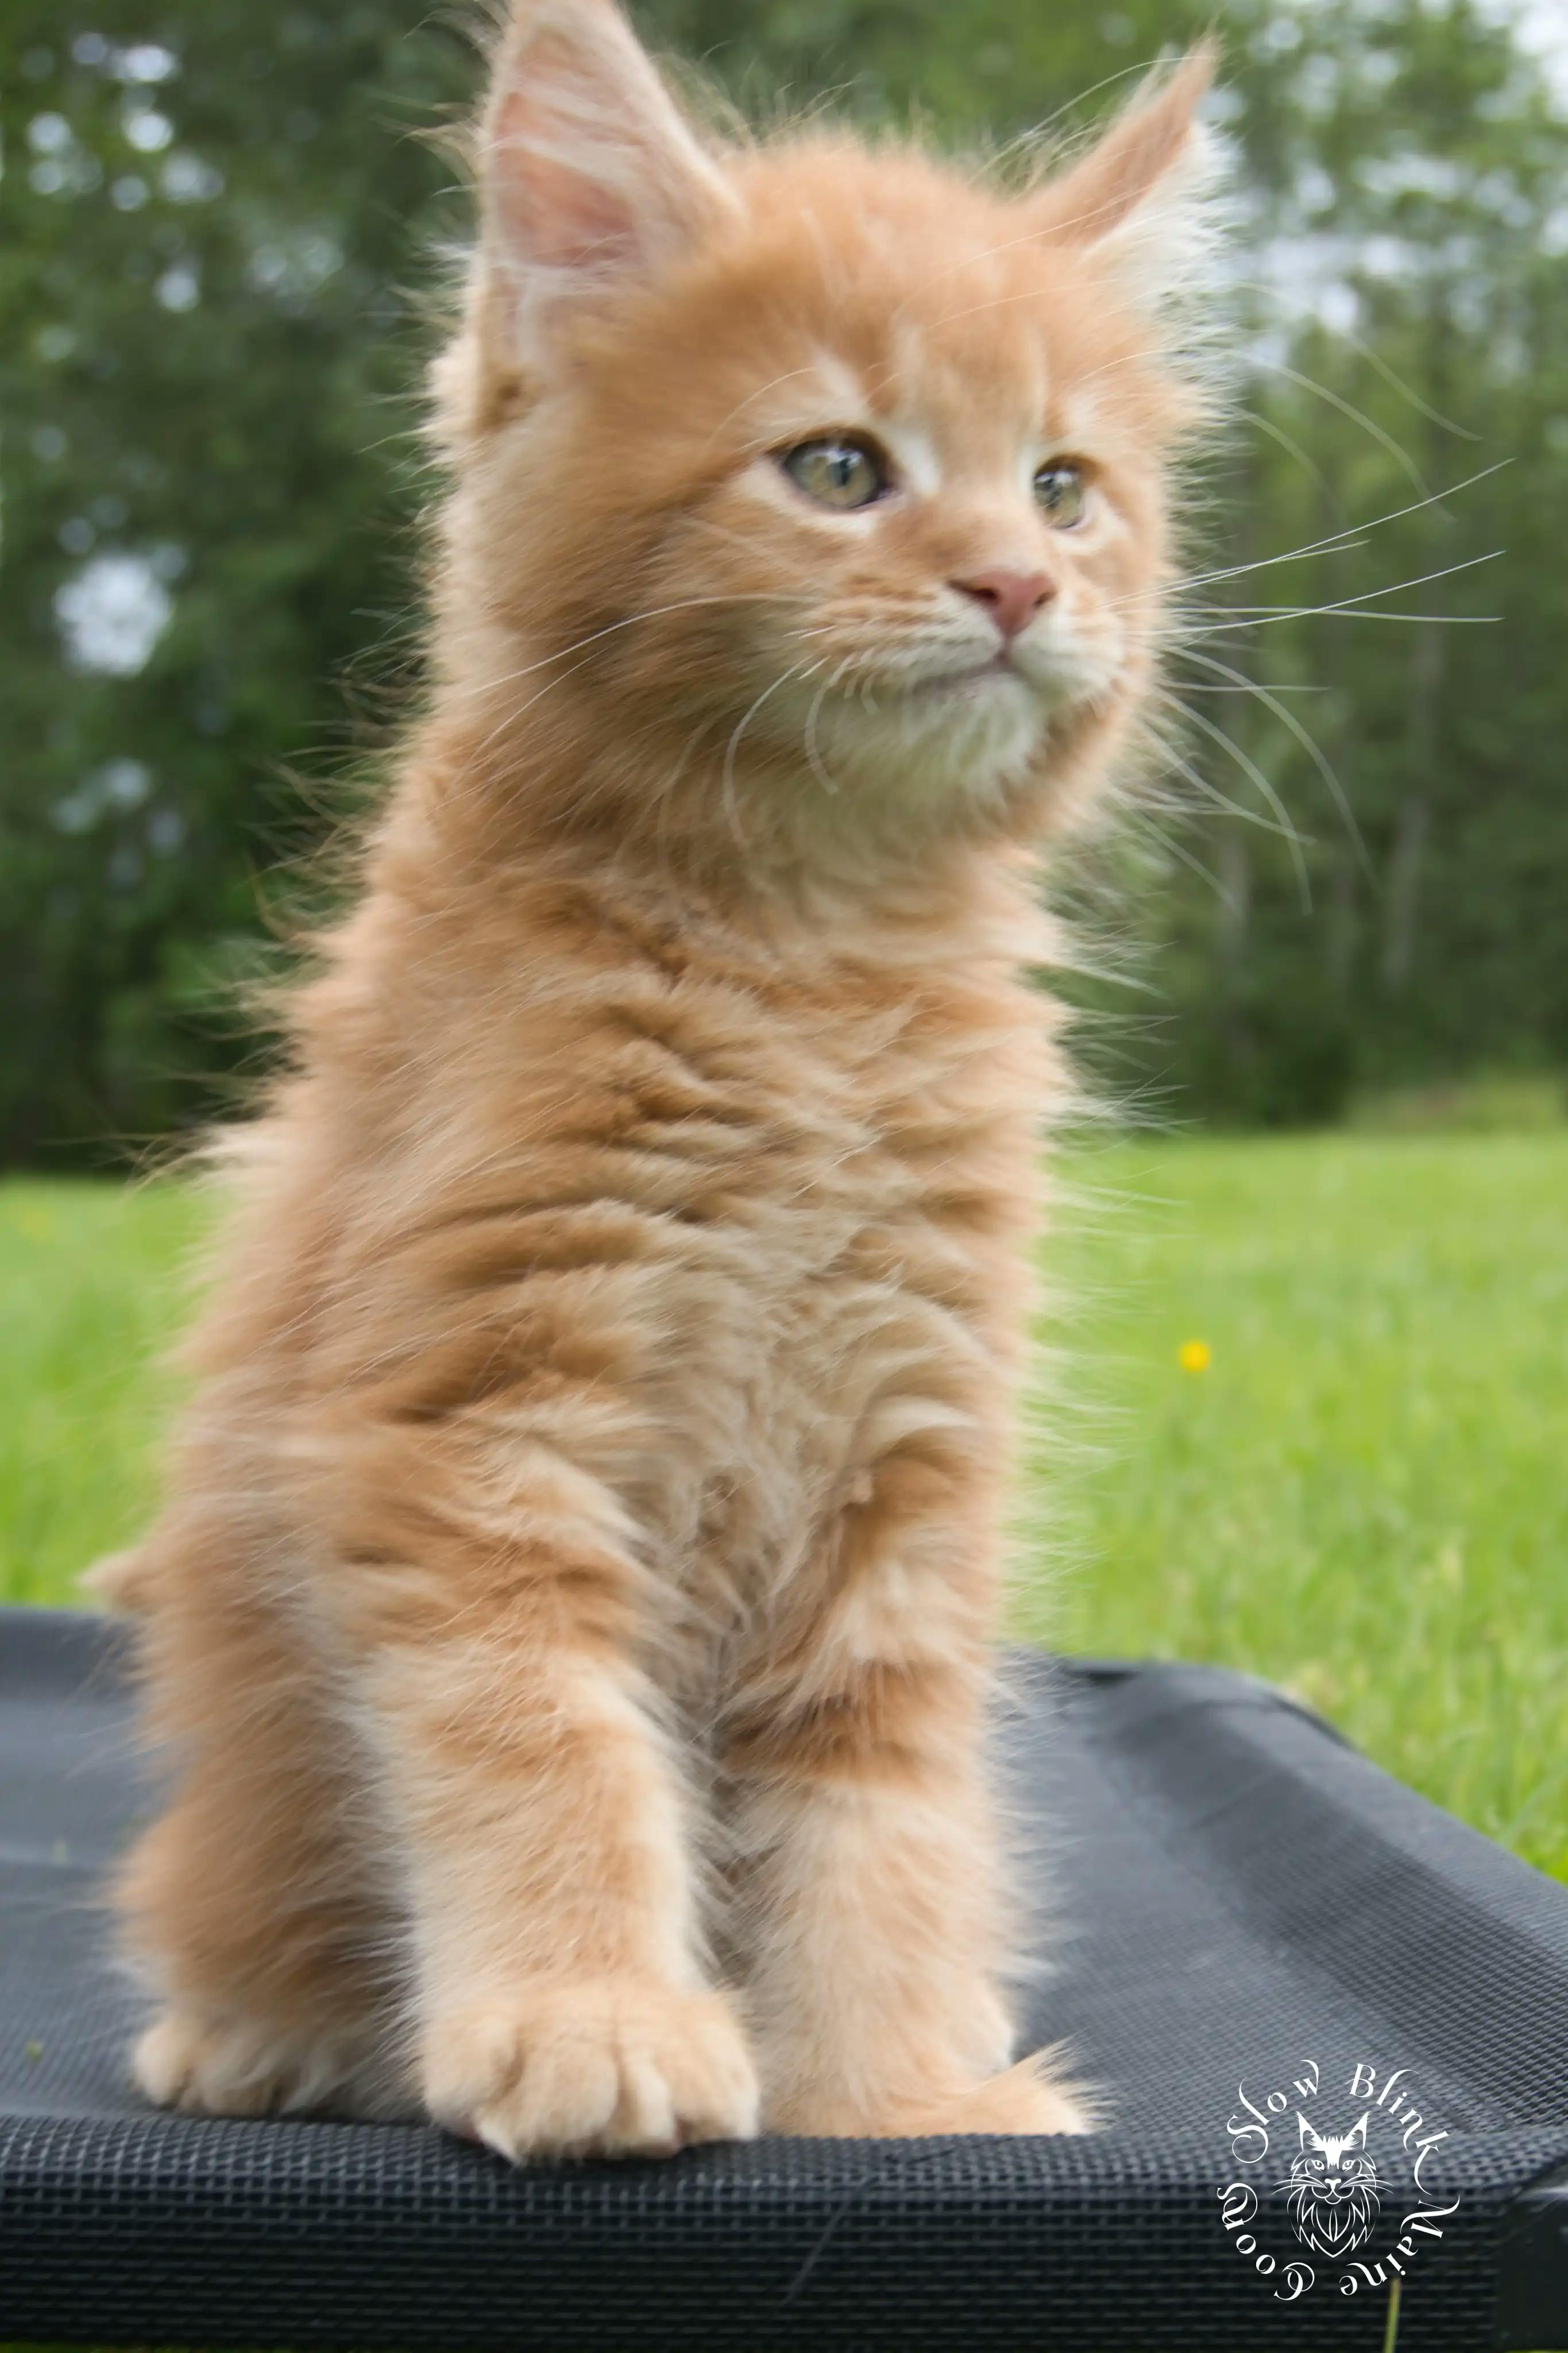 Orange (Red) Maine Coon Kittens > red orange maine coon kitten | slowblinkmainecoons | ems code d ds ds 22 1 13